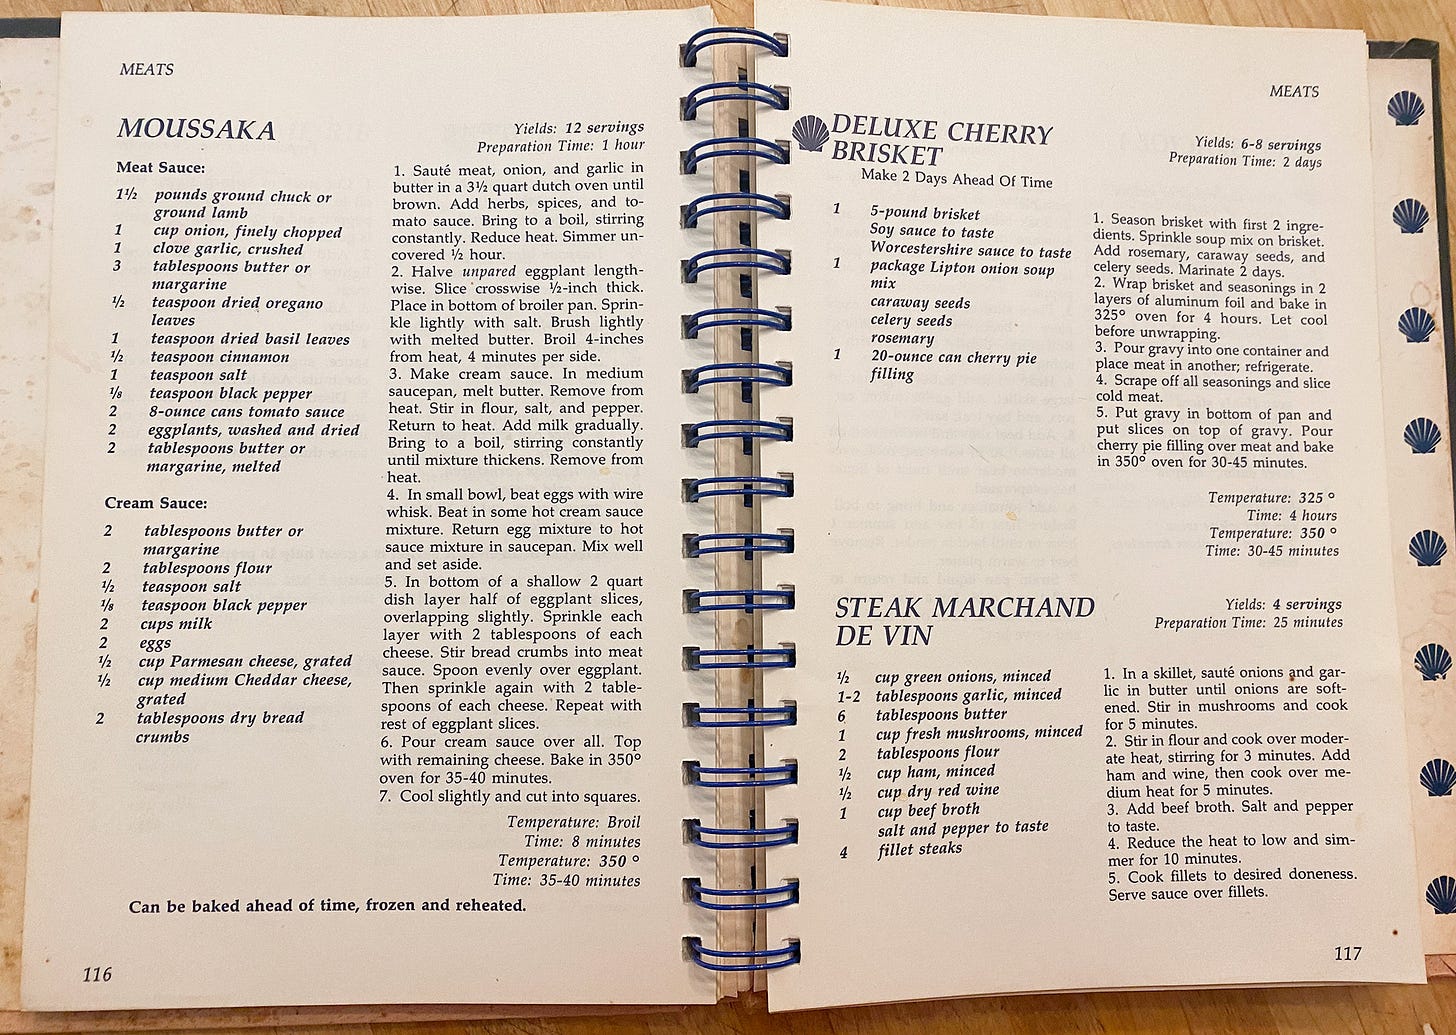 photo of a two-page cookbook spread, with recipes for moussaka, deluxe cherry brisket, and steak marchand de vin